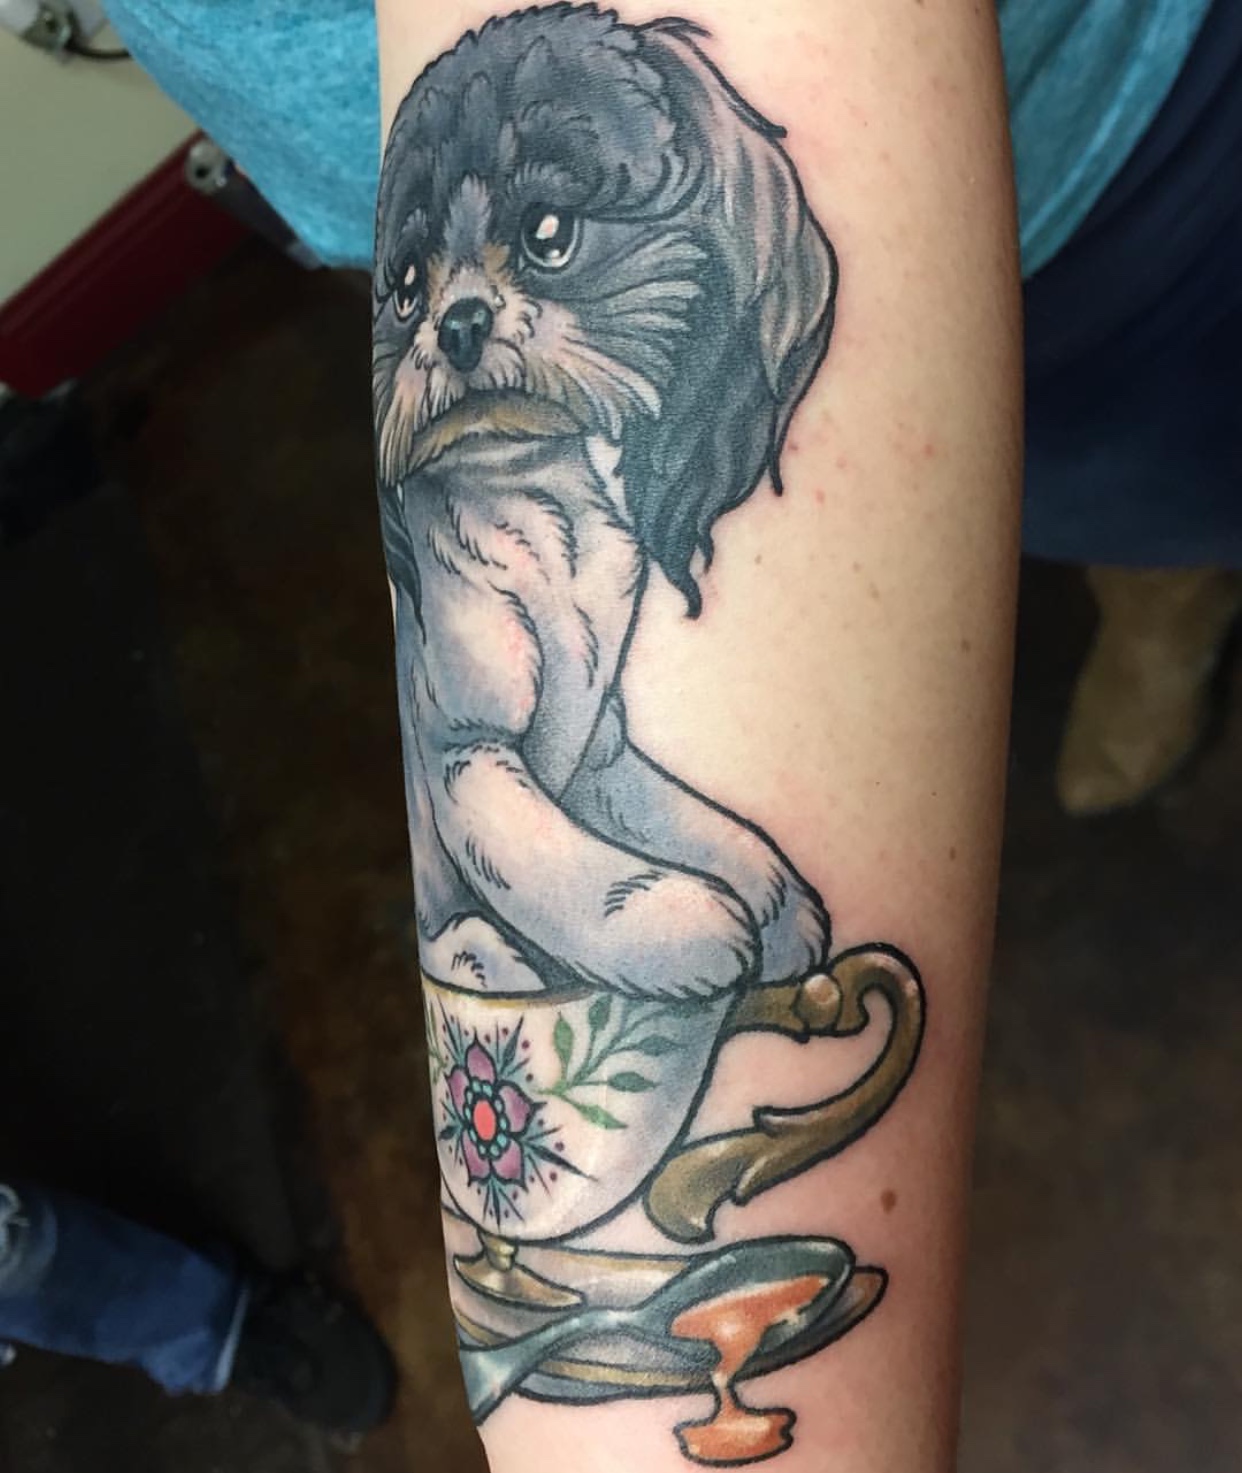 Shih Tzu sitting on a cup tattoo on the forearm